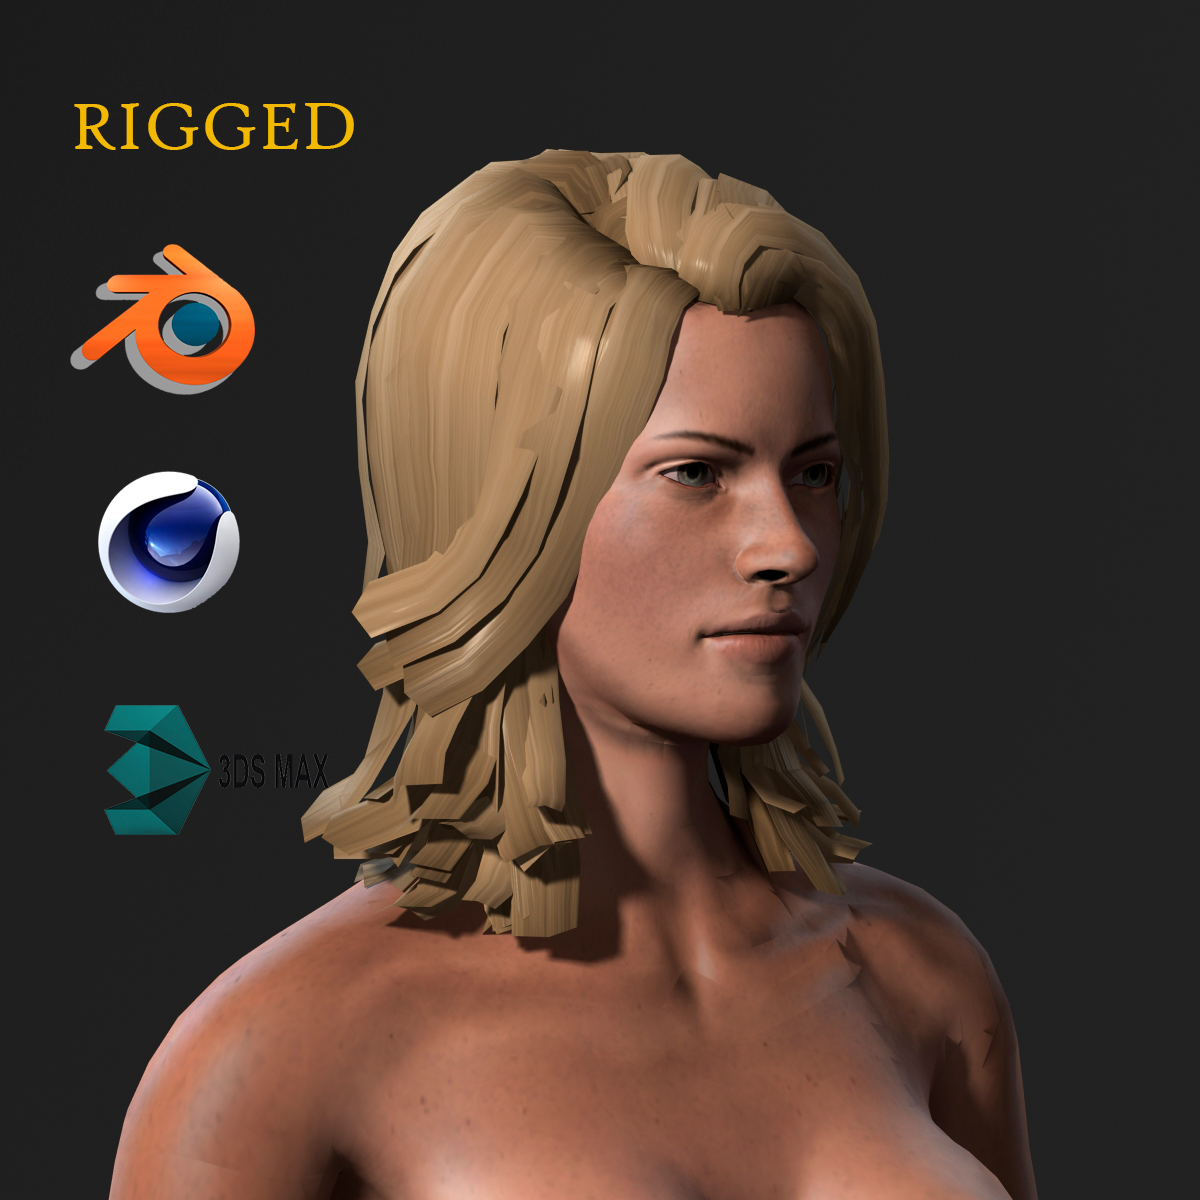 Beautiful Naked Woman Rigged D Game Character Low Poly D Model Cad My